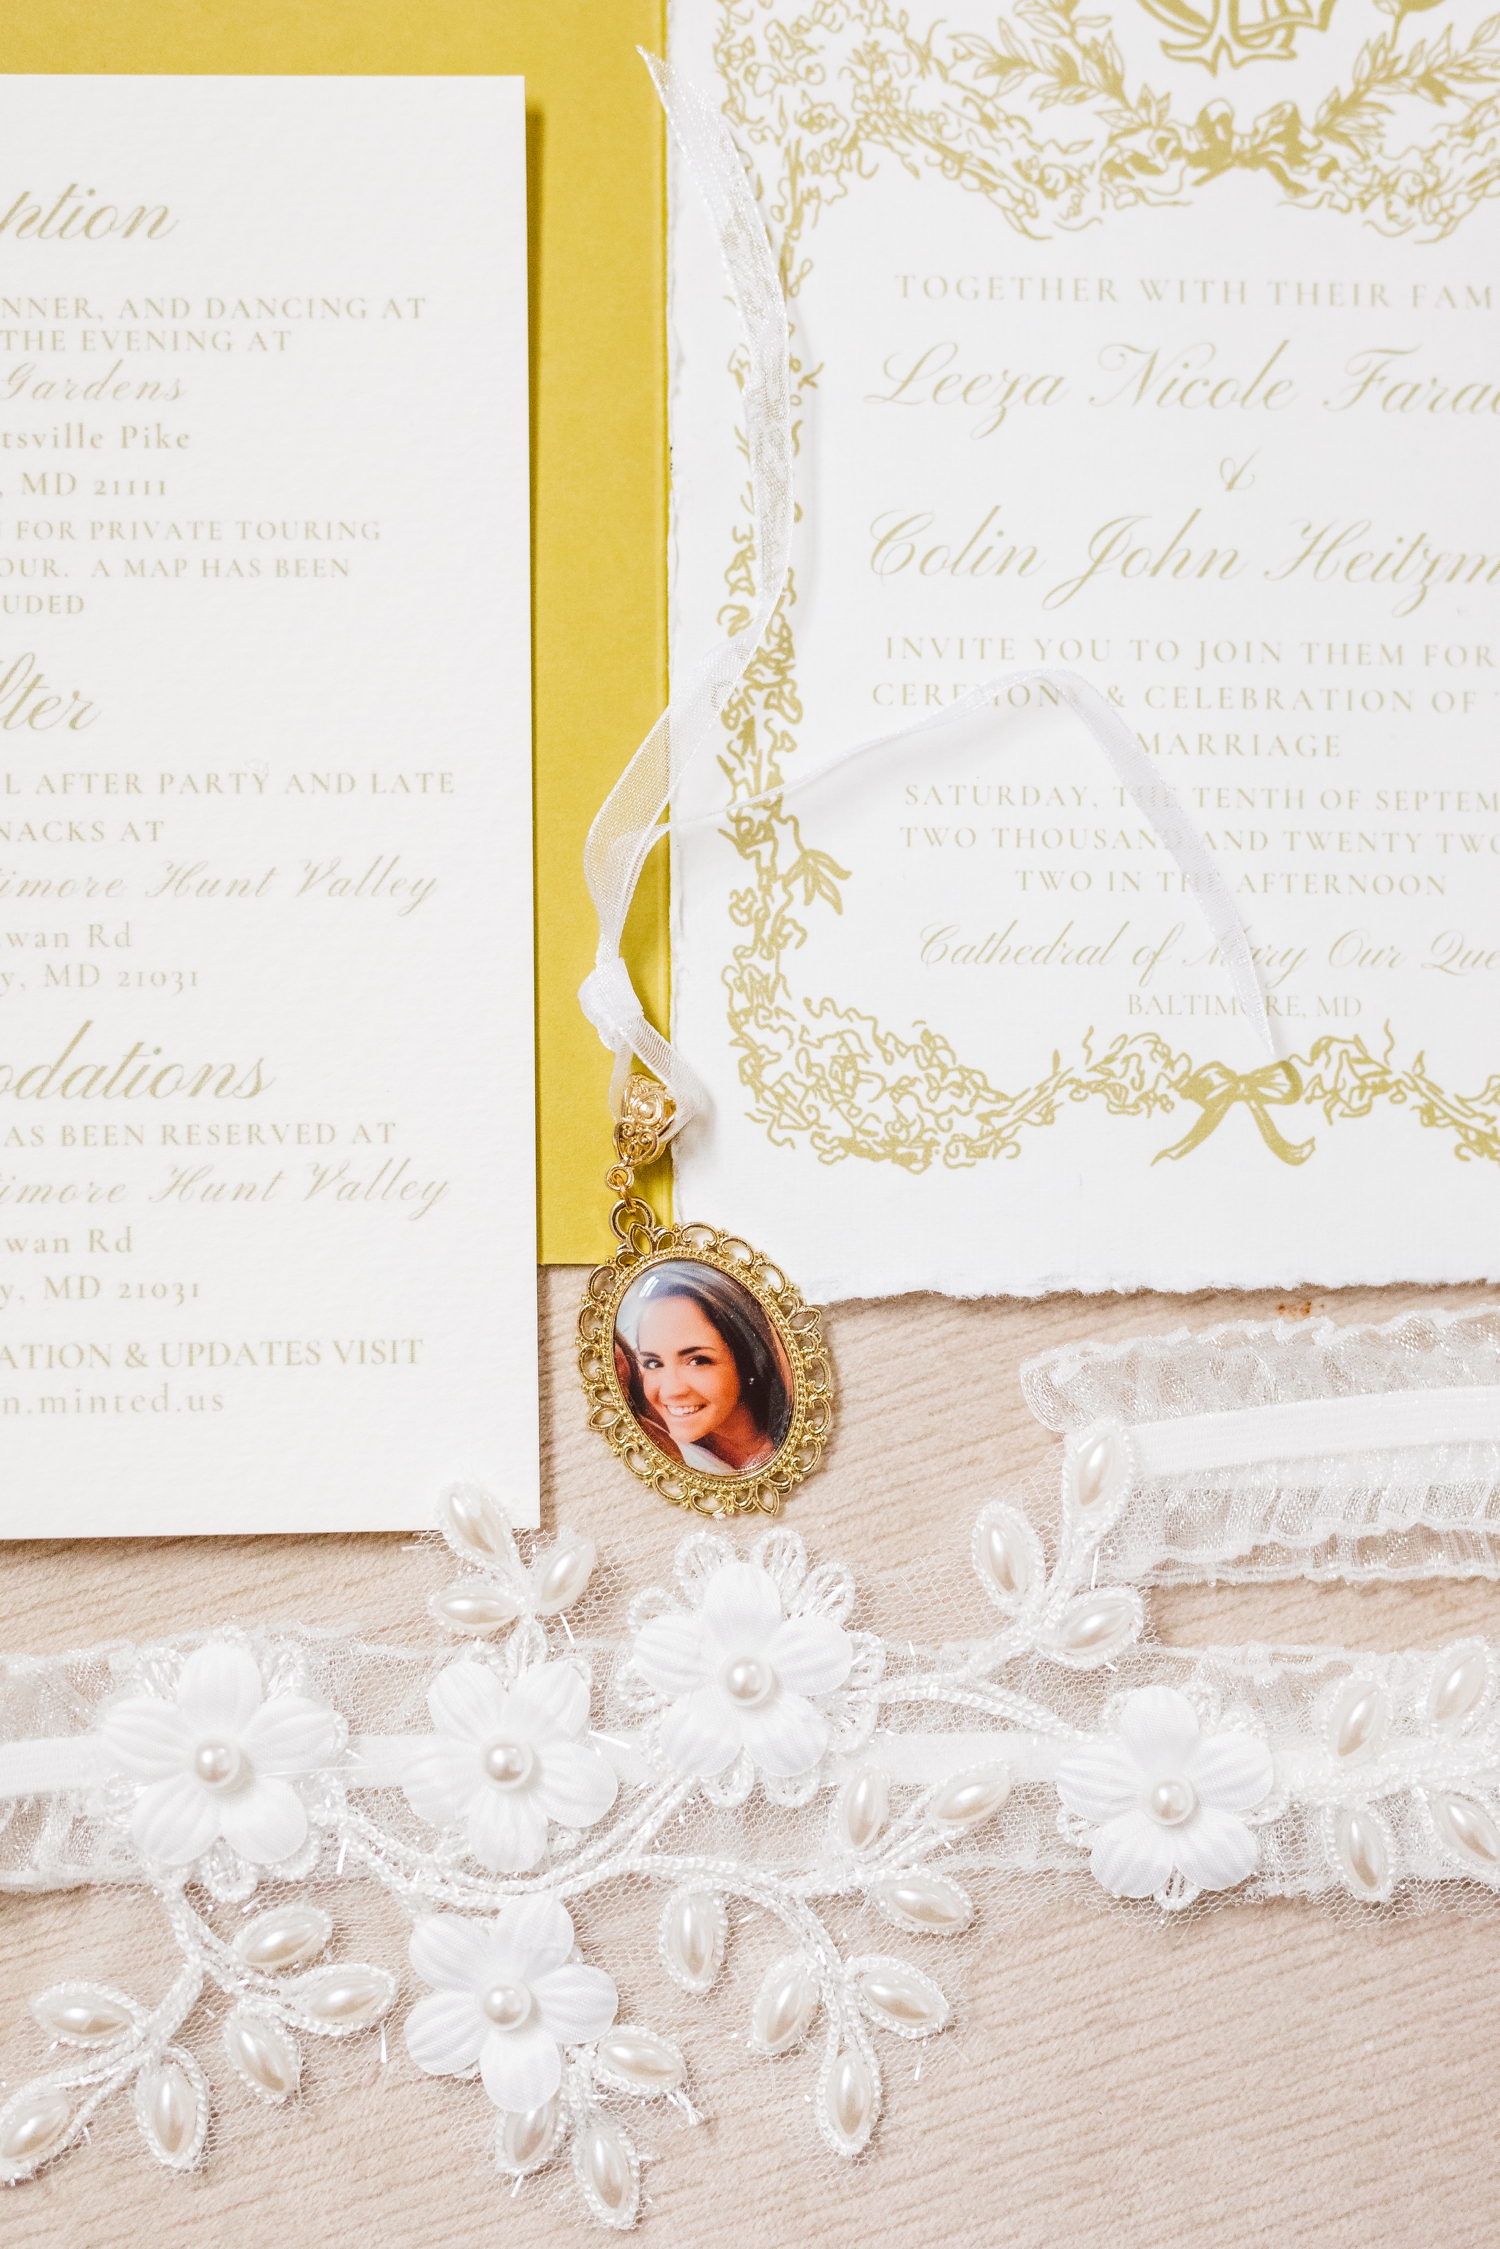 Photo of bride's sister on locket next to invitation suite | Brooke Michelle Photo